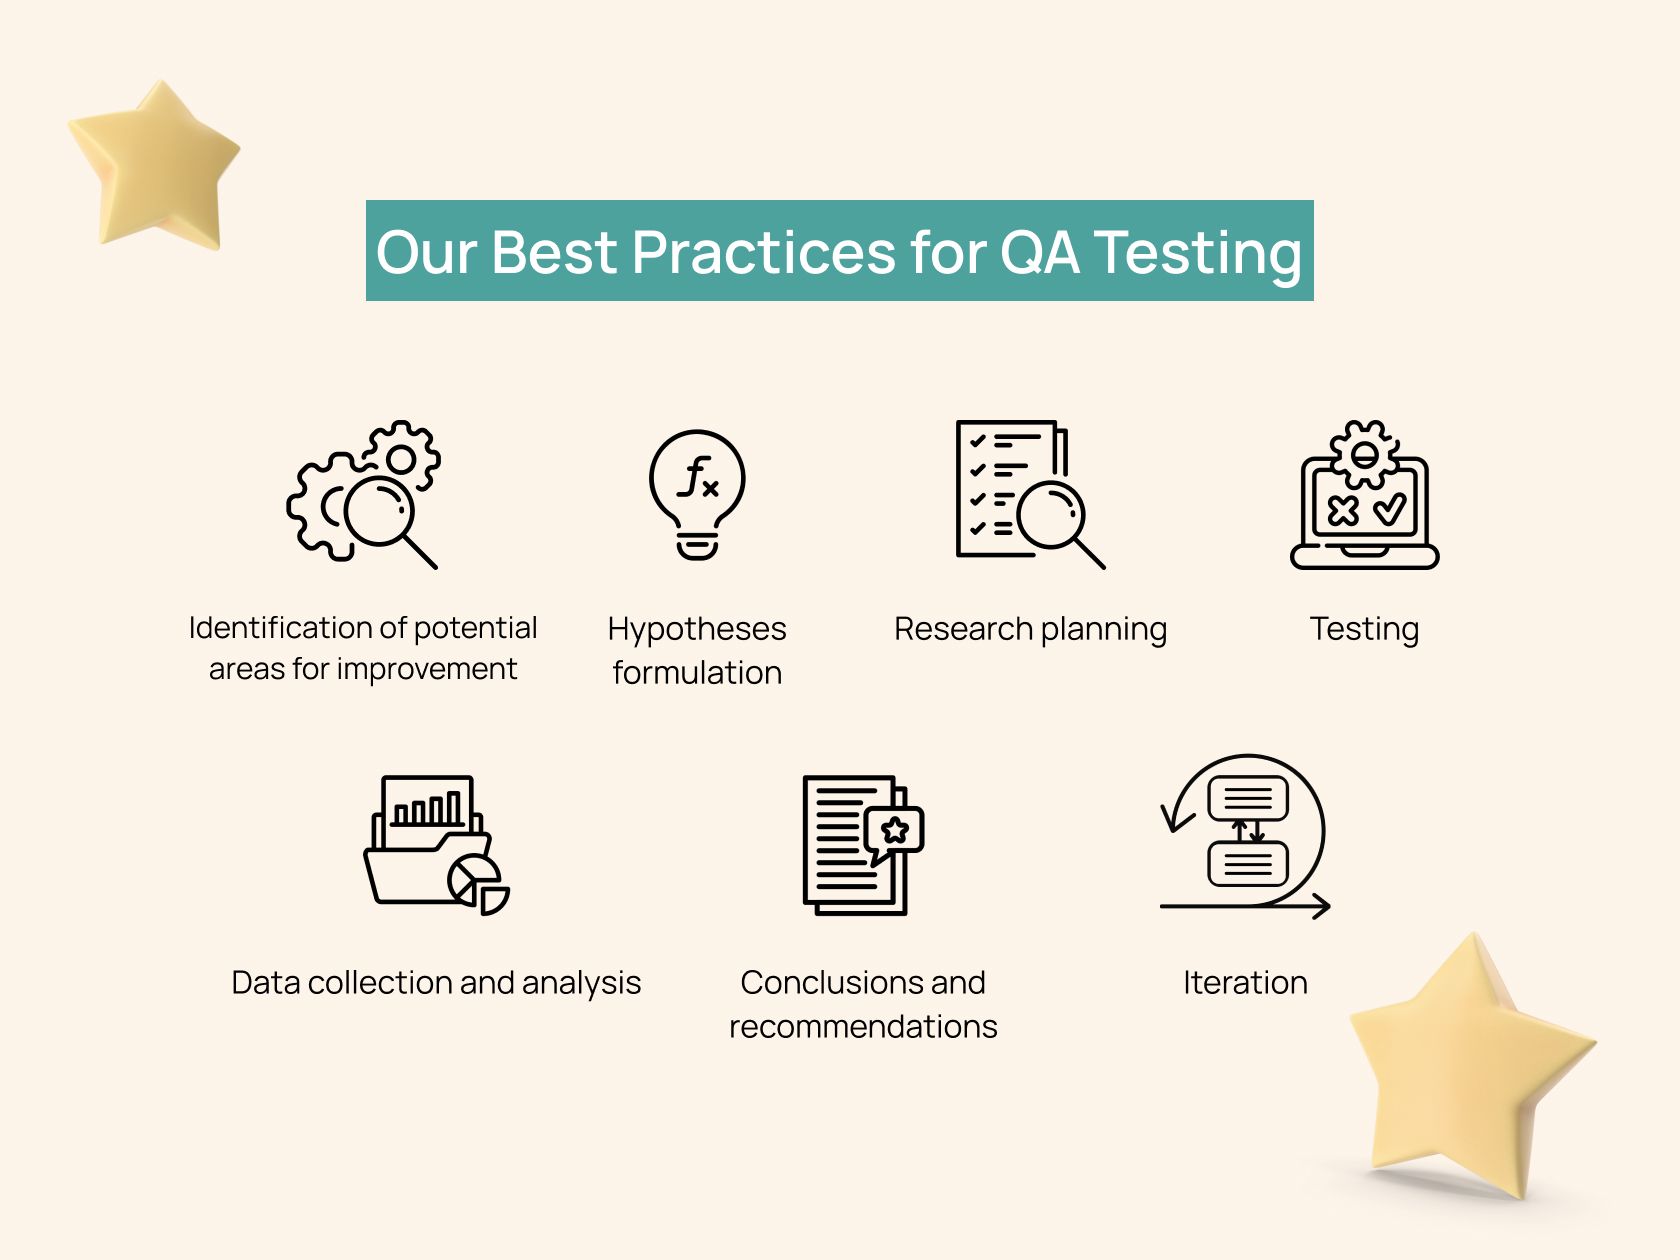 Our Best Practices for QA Testing